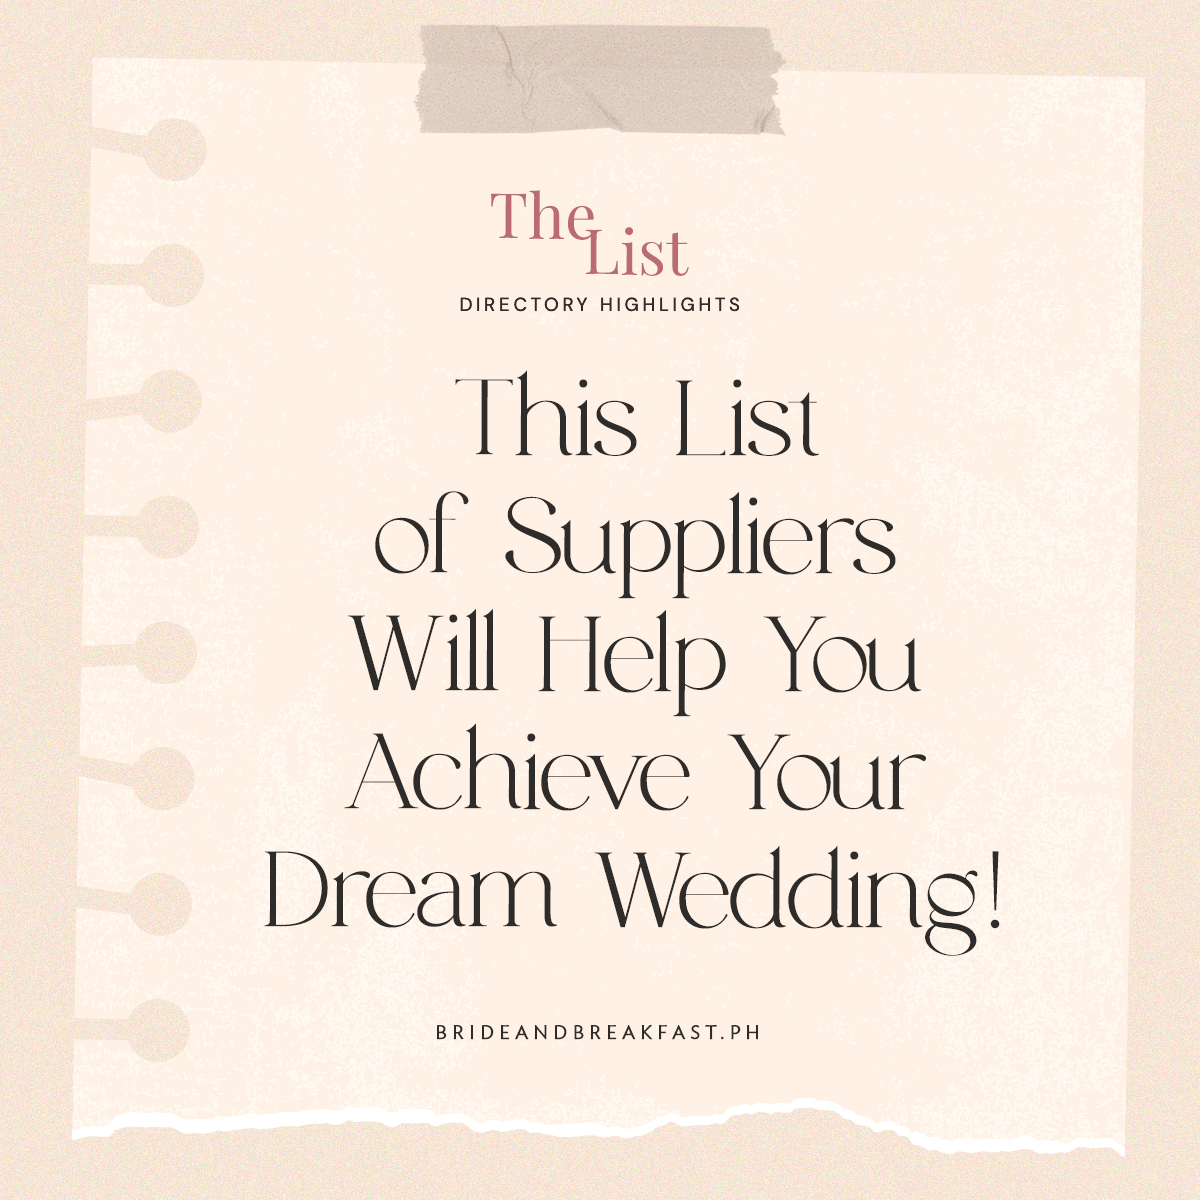 This List of Suppliers Will Help You Achieve Your Dream Wedding!